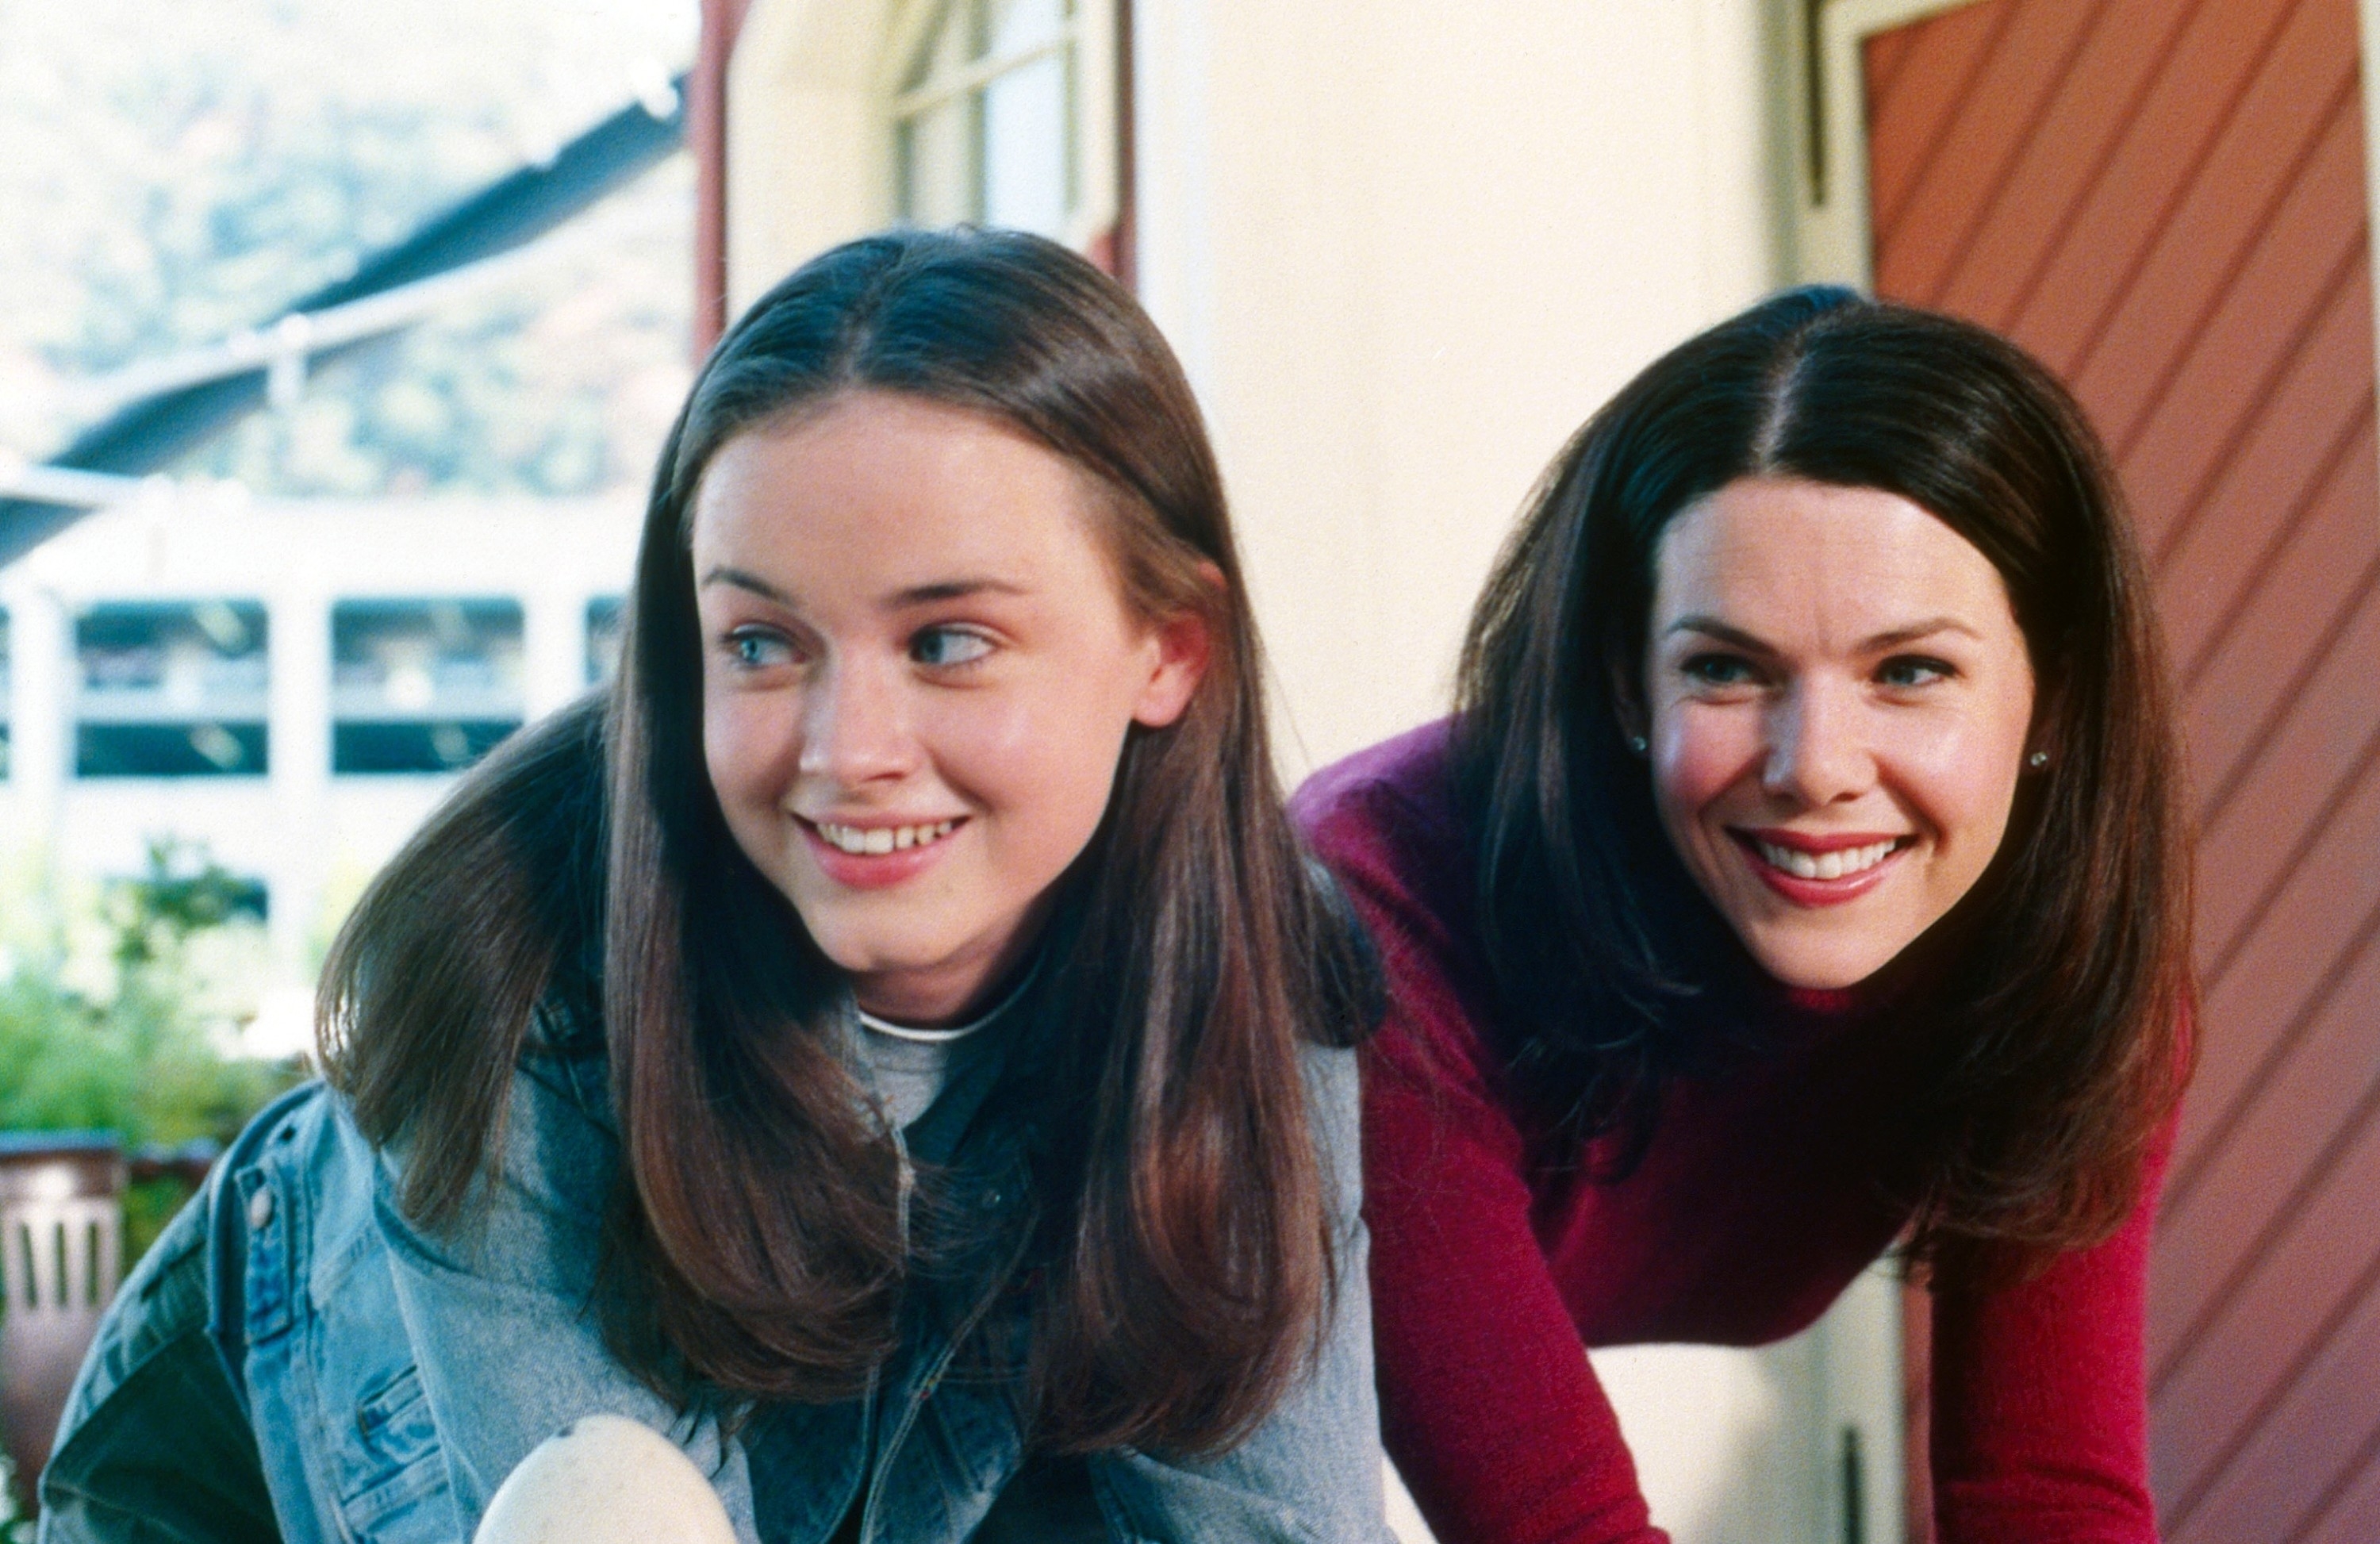 Rory and Lorelai from &quot;Gilmore Girls&quot; lean forward, smiling, in casual attire